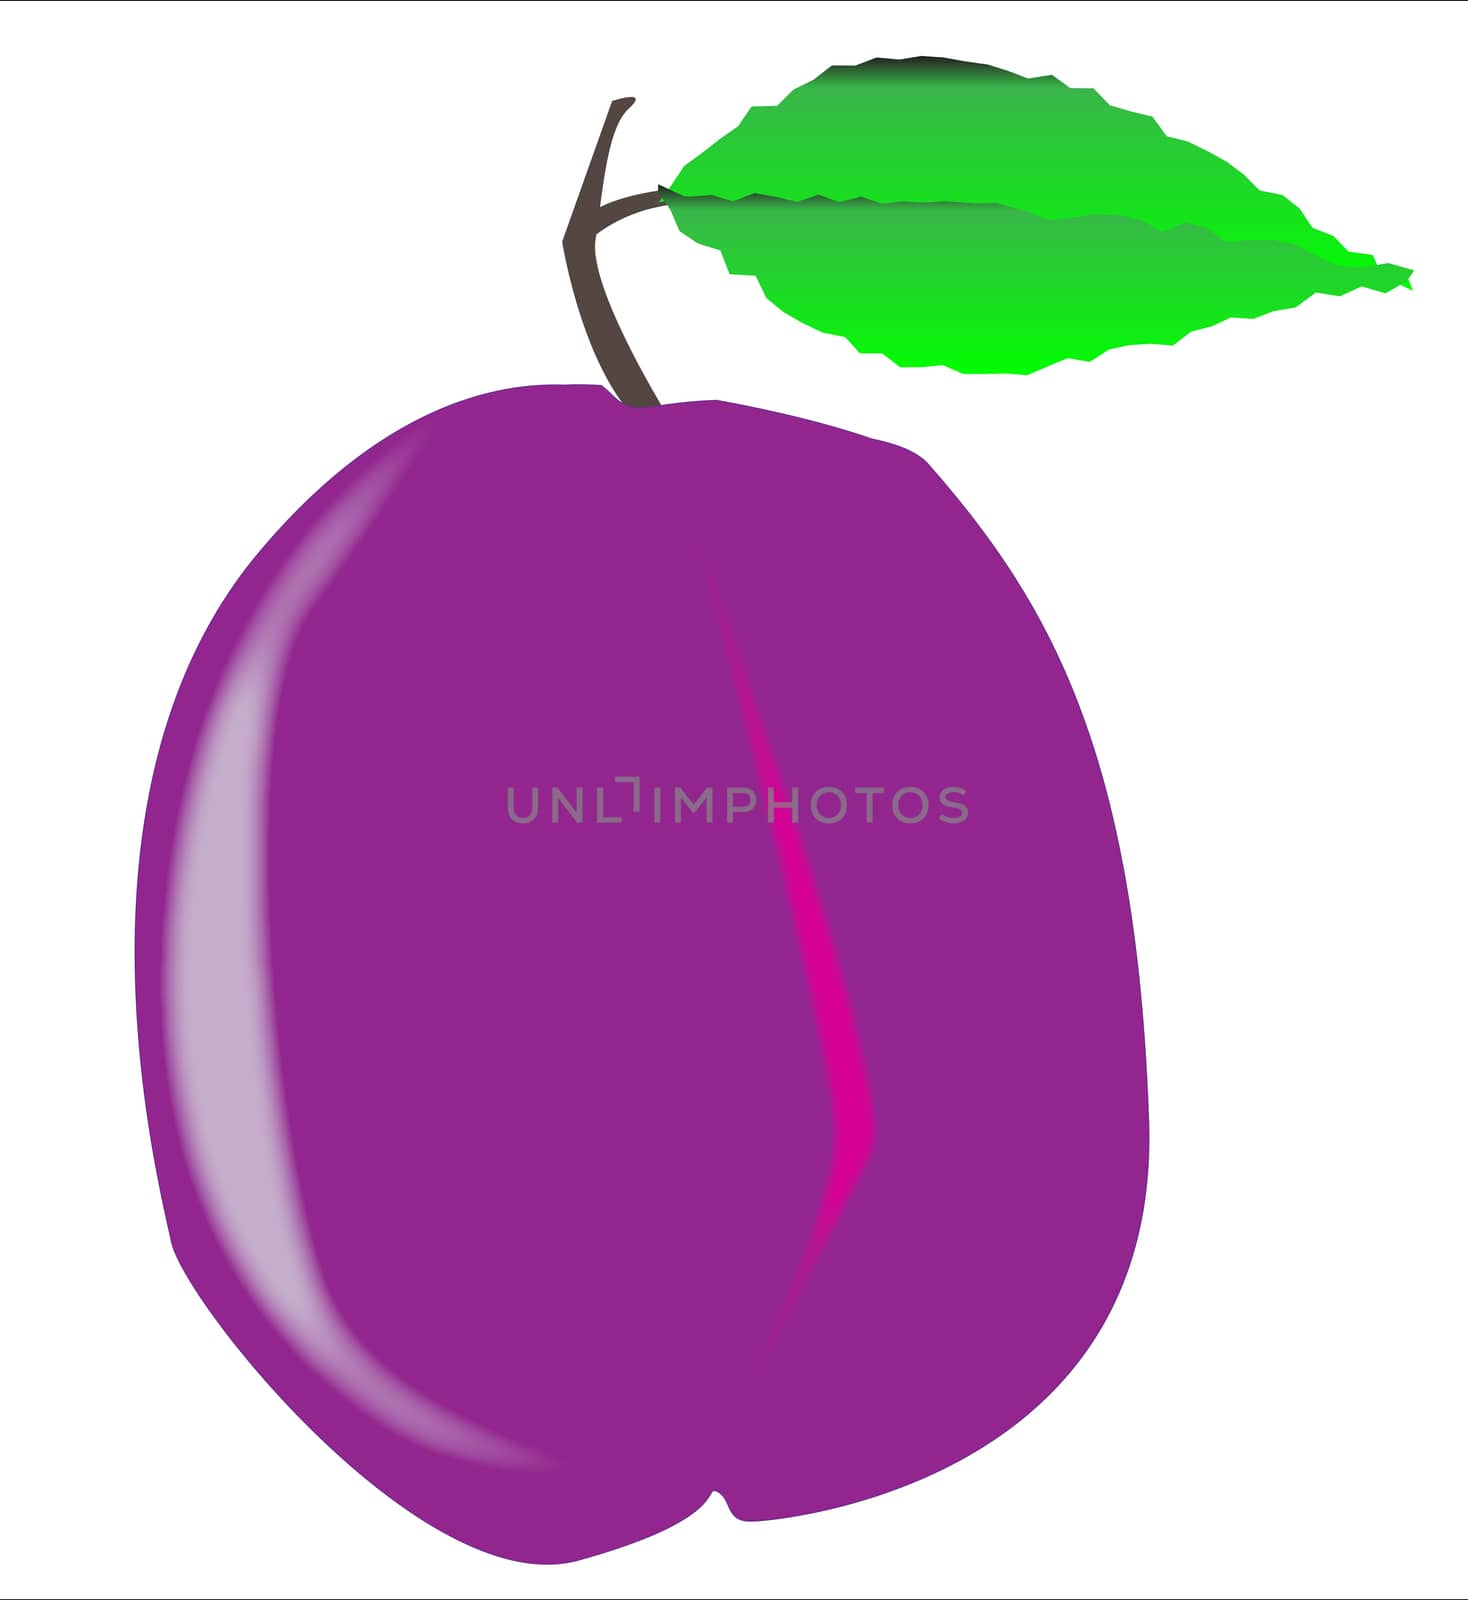 A sole purple isolated plum with green leaf and stalk